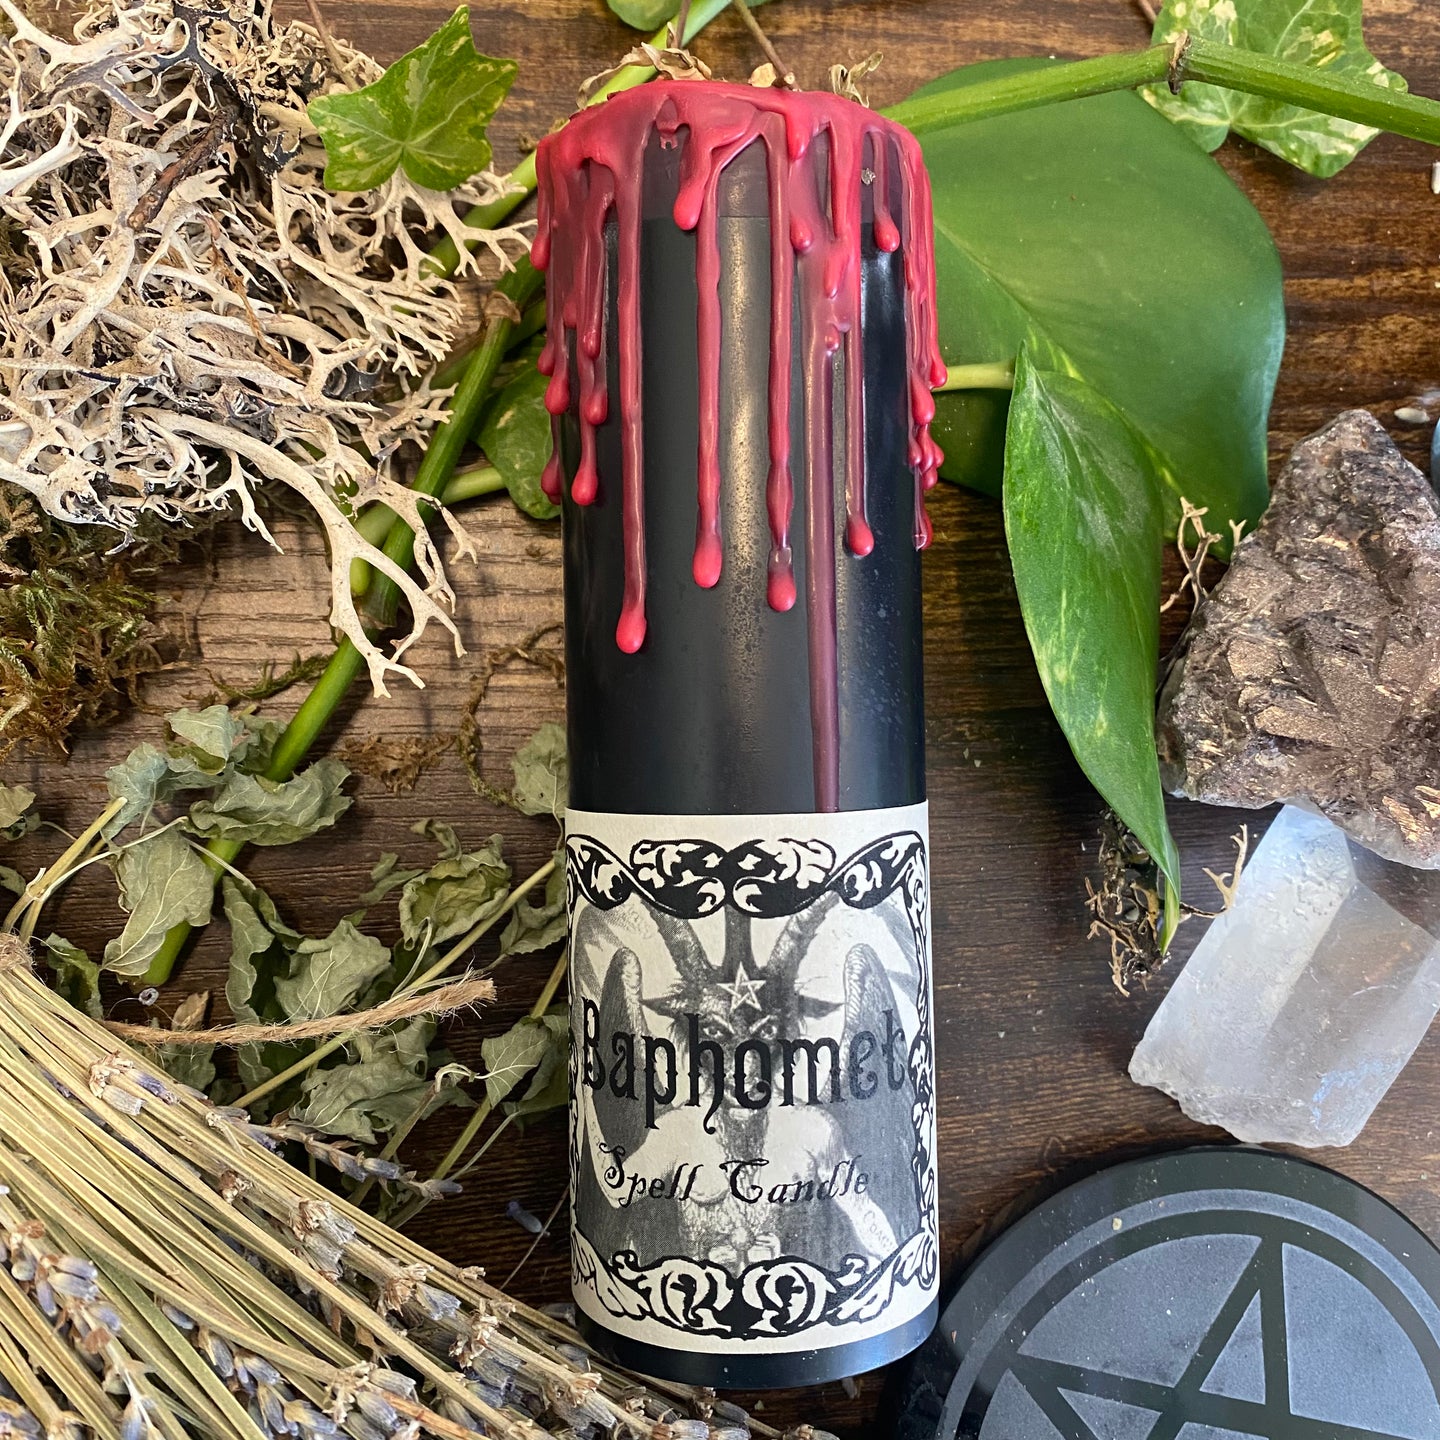 Baphomet Magical Ritual Spell Candle